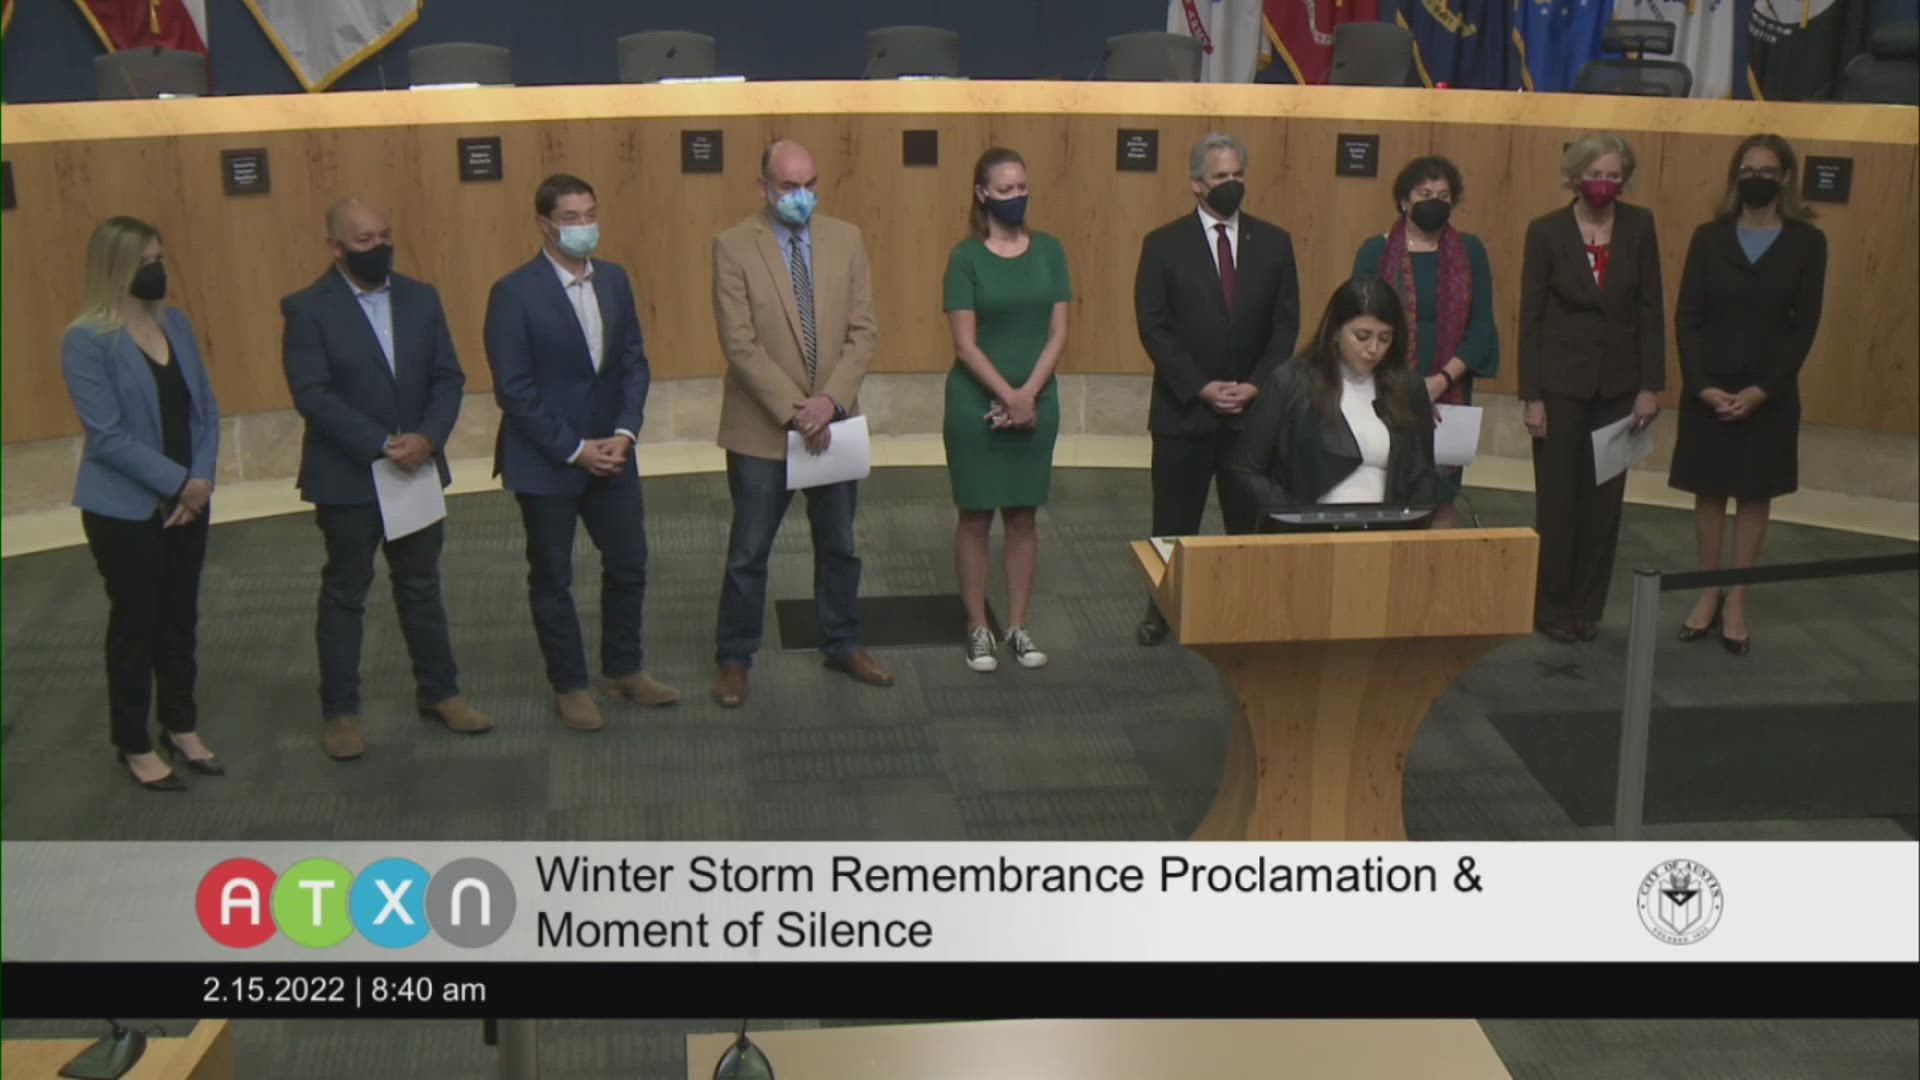 City leaders issued a proclamation declaring February as "Winter Storm Uri Remembrance Month," and held a moment of silence for those who died due to the storm.